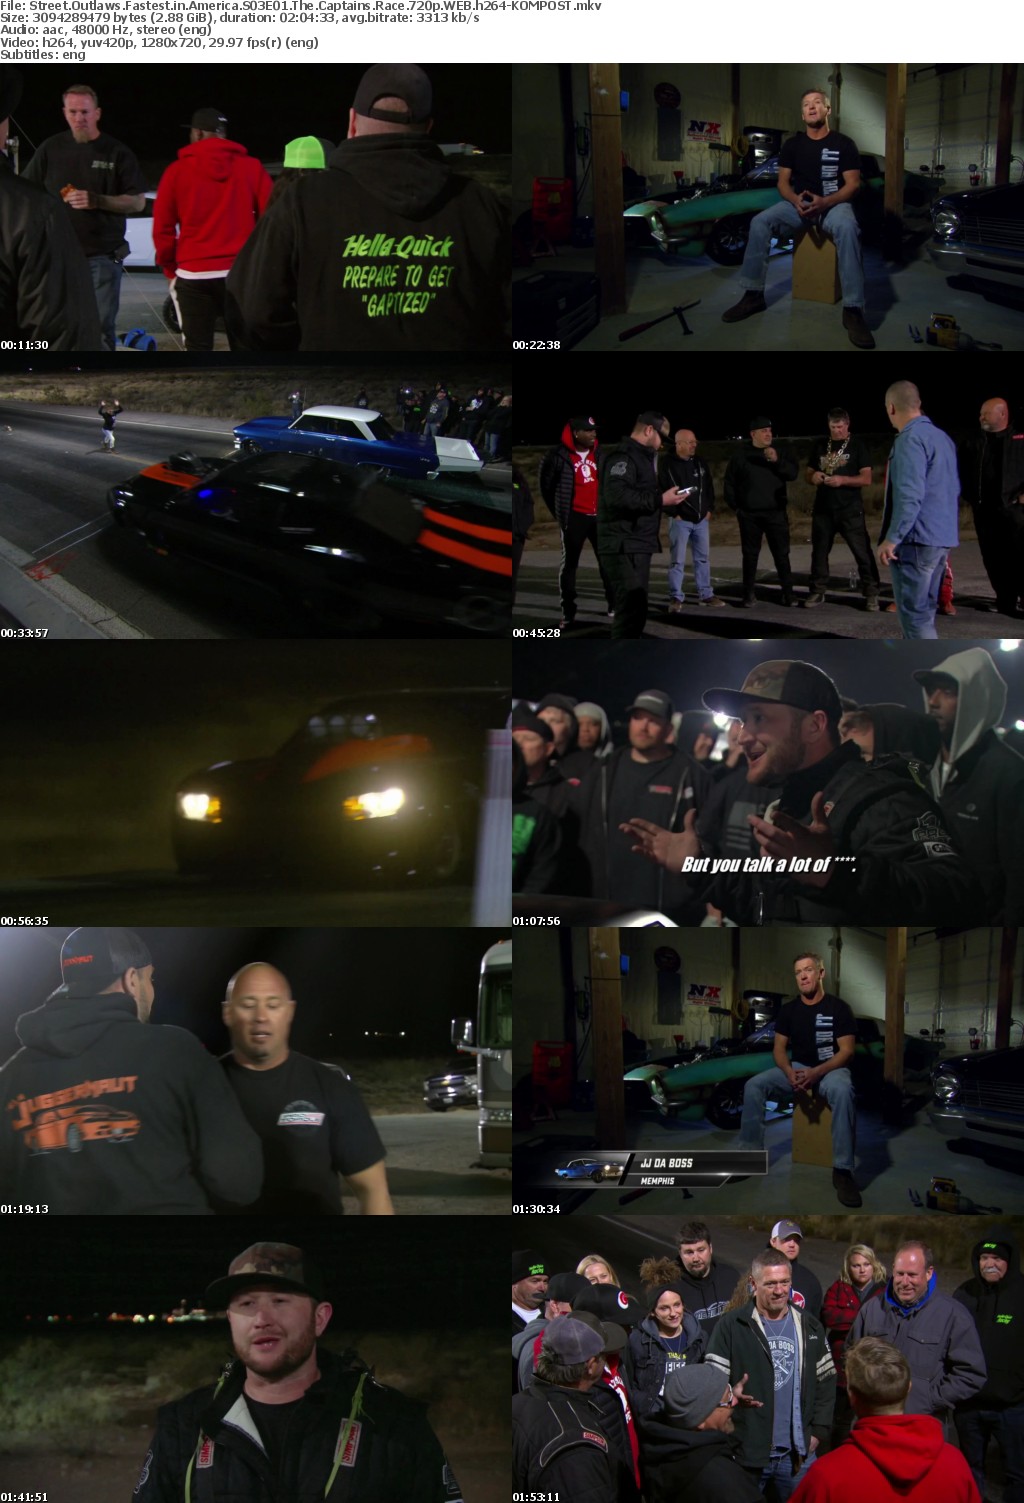 Street Outlaws Fastest in America S03E01 The Captains Race 720p WEB h264-KOMPOST